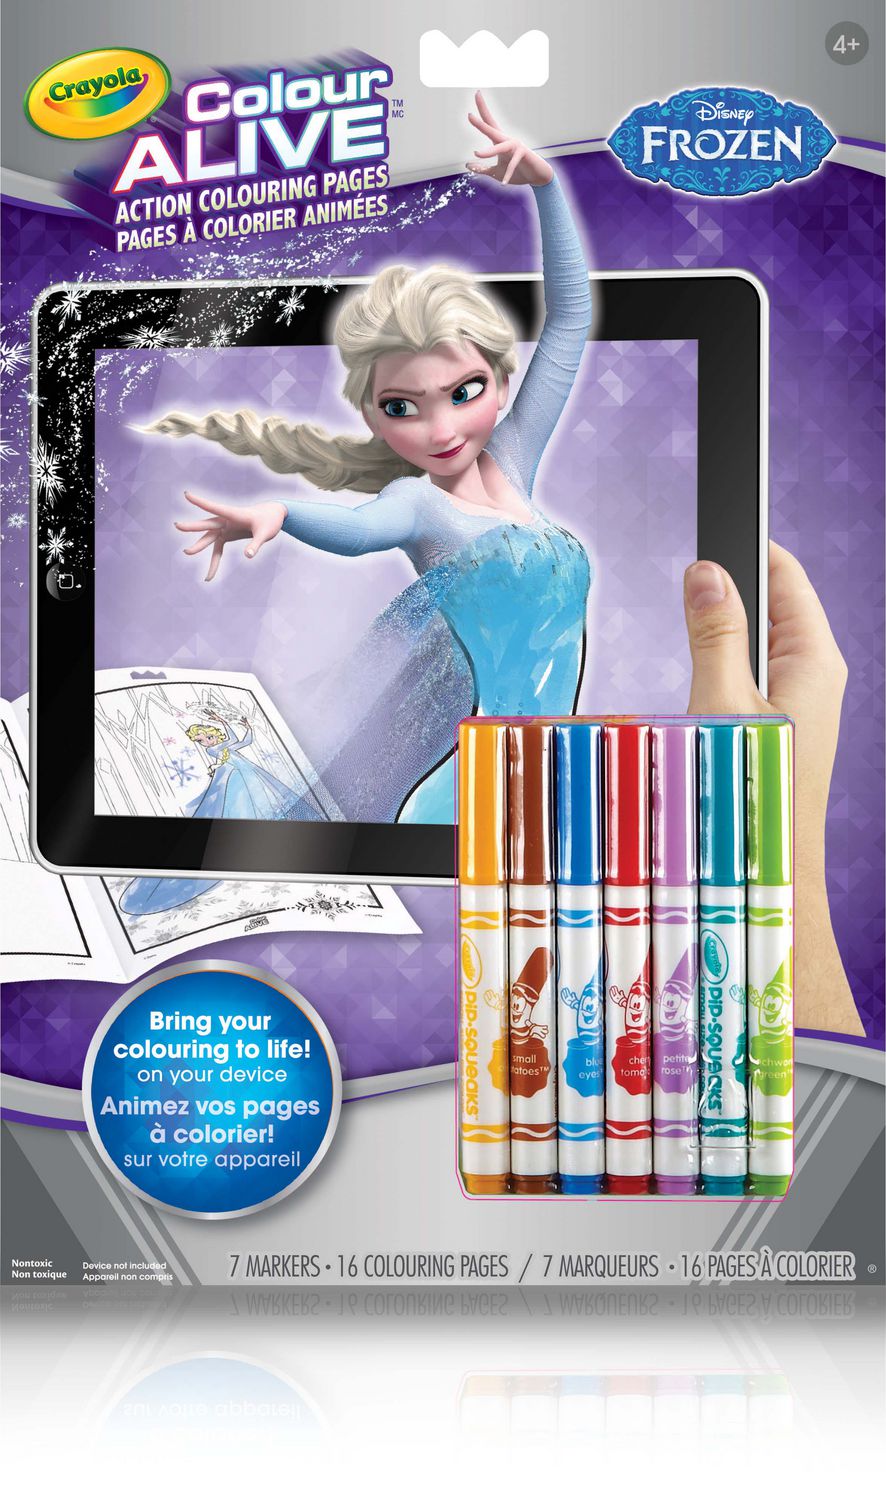 Download Crayola Frozen Colour Alive Action Colouring Pages ...